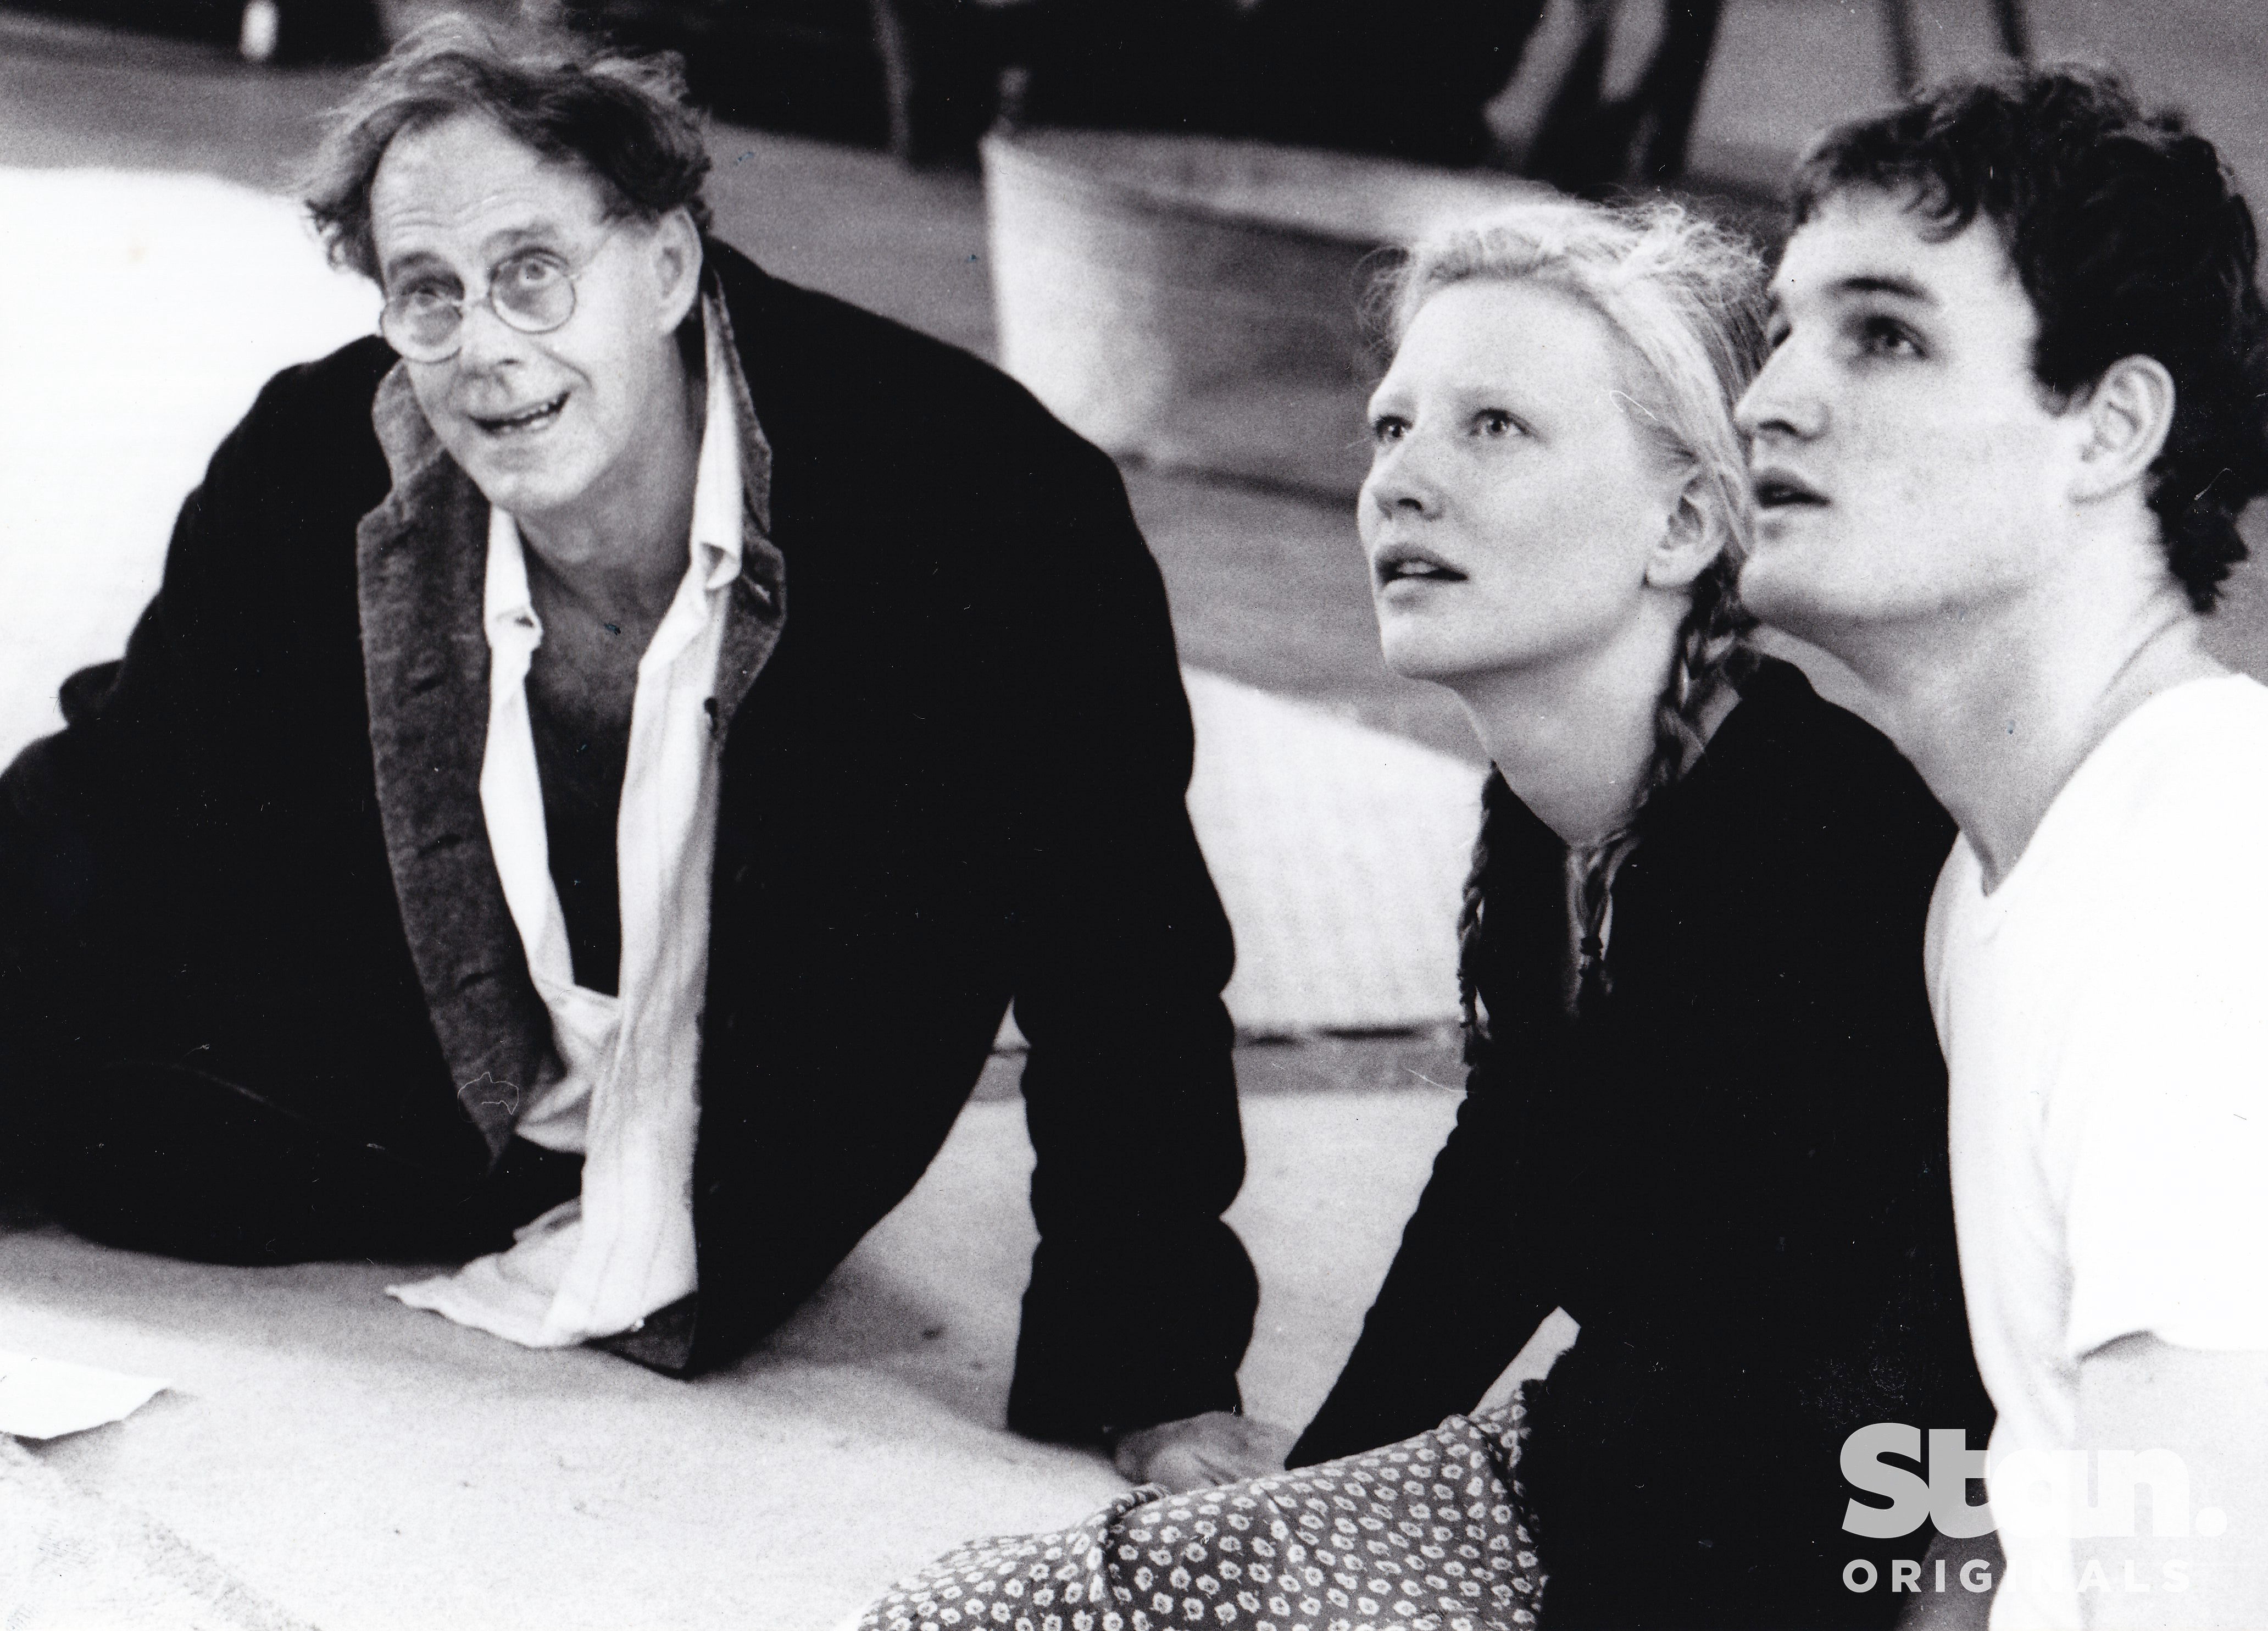 Barry Otto with Cate Blanchett and Jason Clarke performing 'The Tempest' in 1995 (photo credit: Heidrun Löhr)